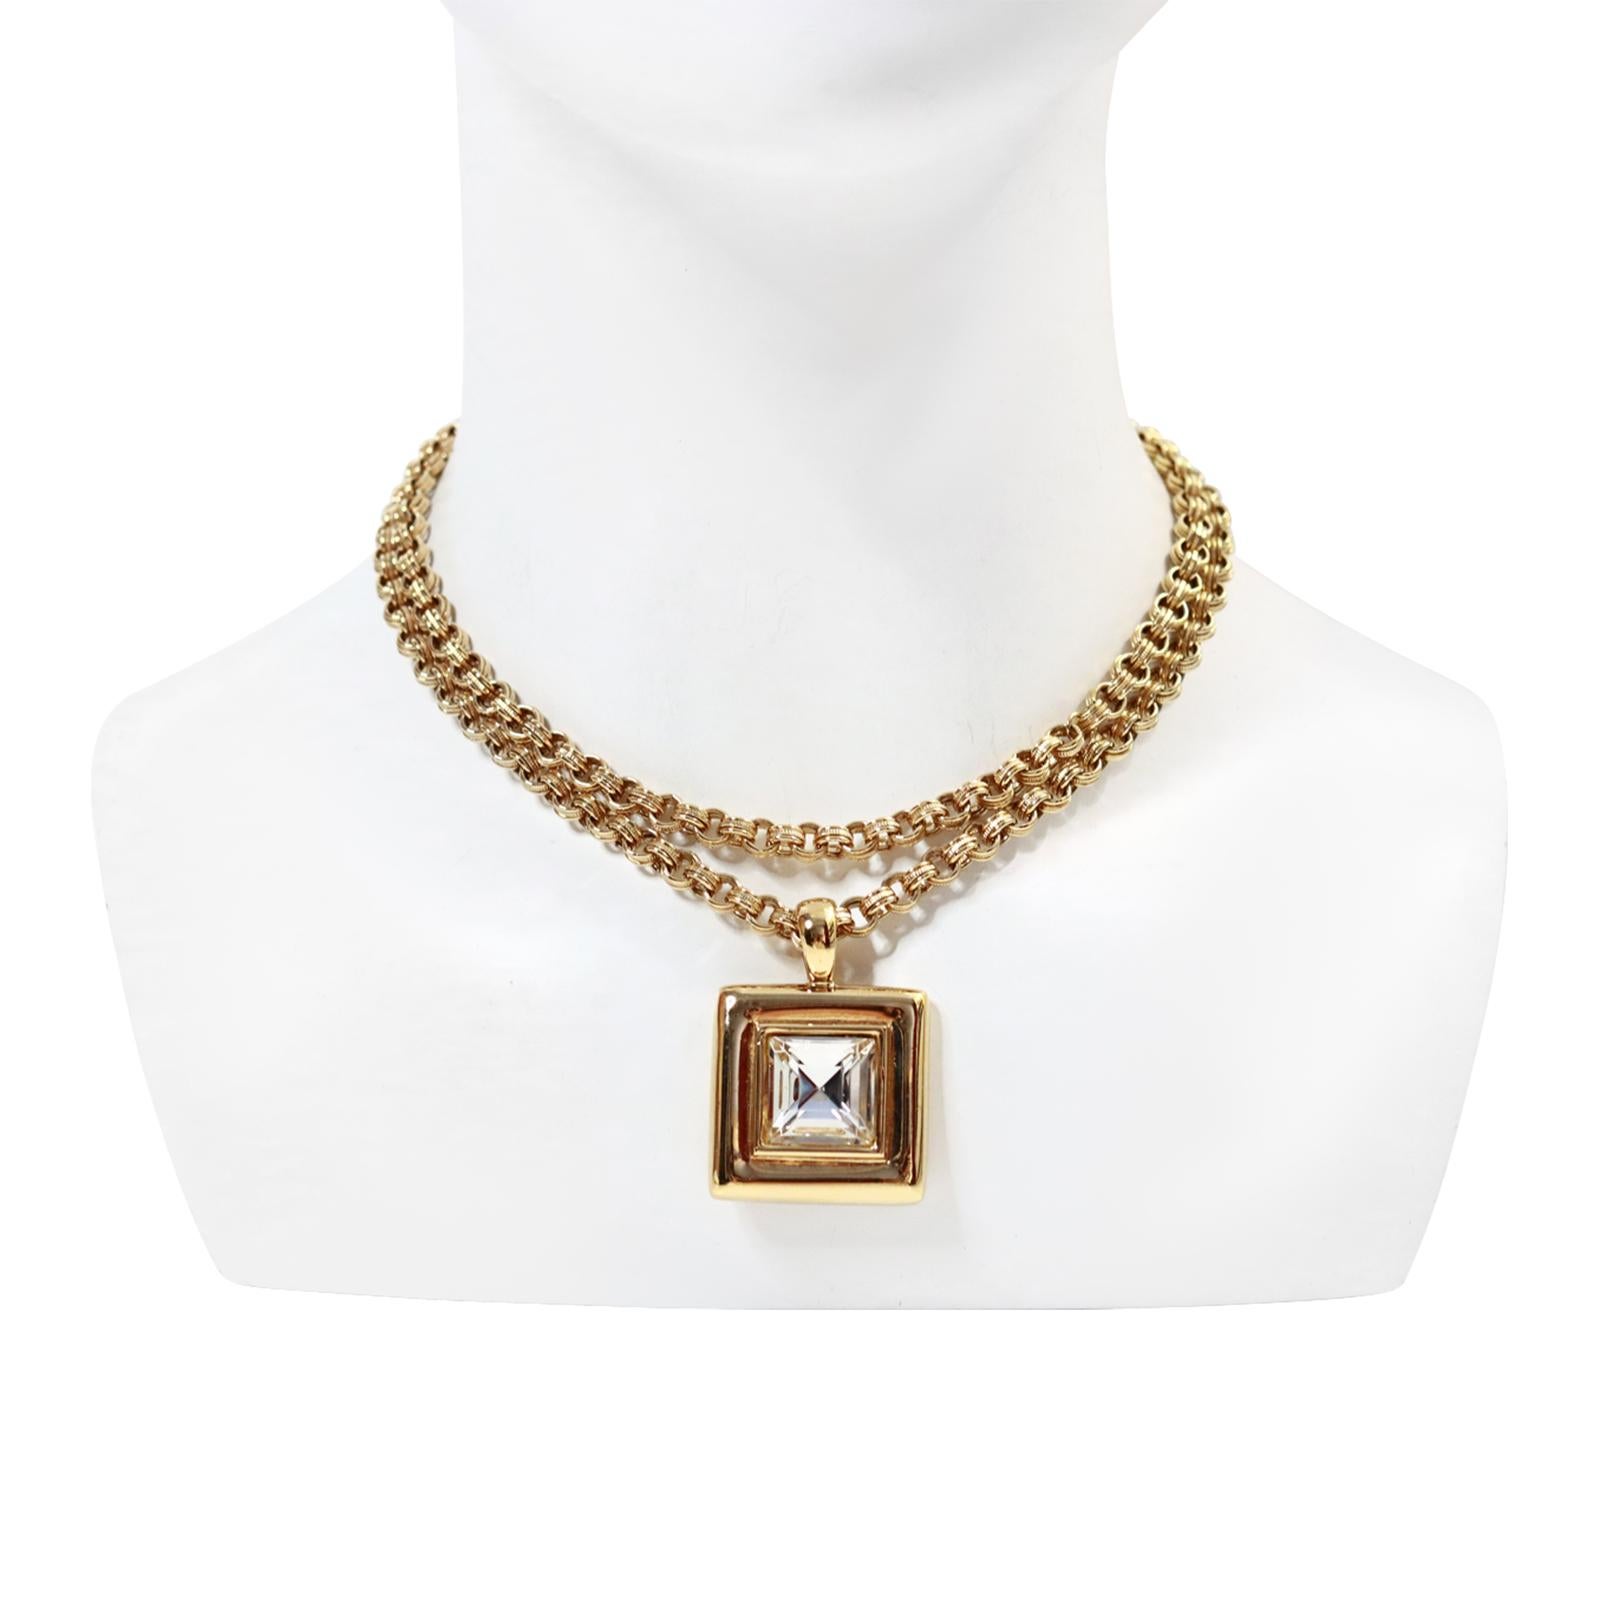 Vintage Givenchy Link Chain with Dangling Drop Necklace Circa 1980s For Sale 3